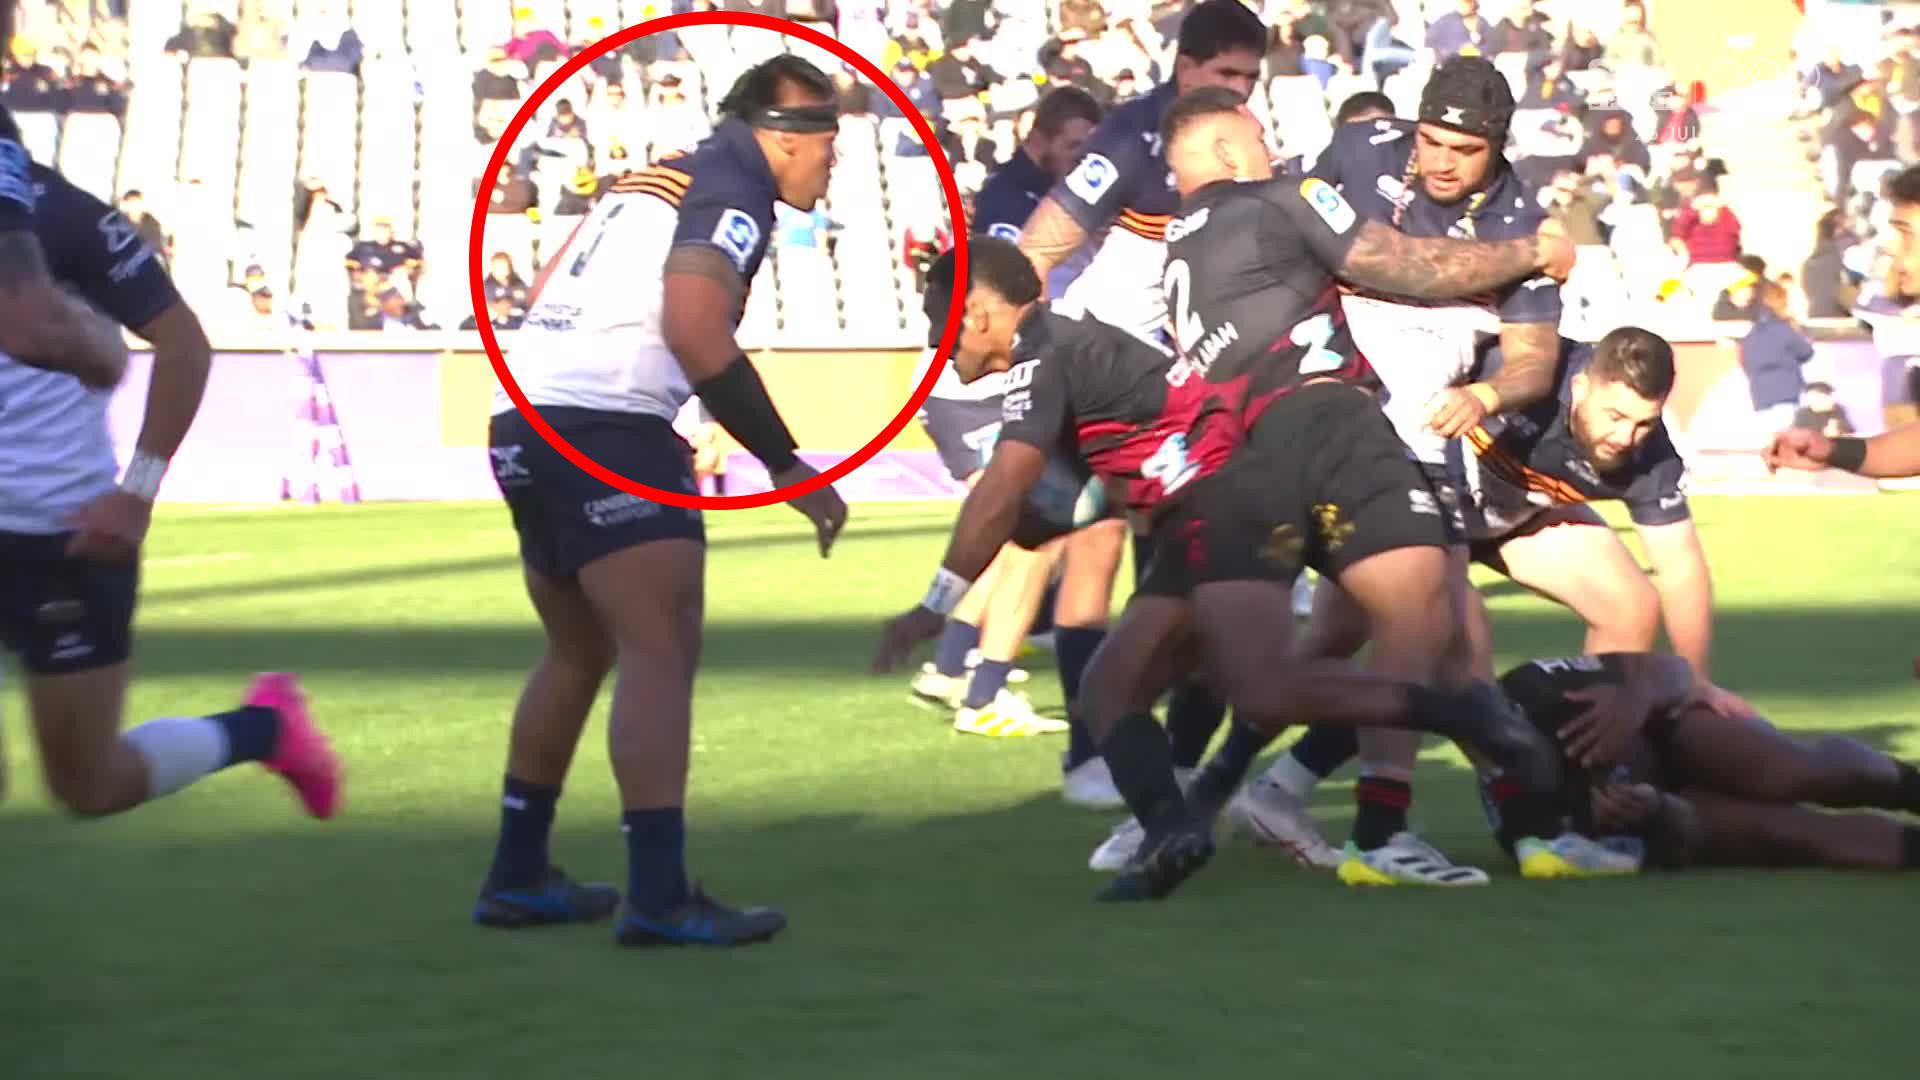 Brumbies captain Allan Alaalatoa was caught looking at the defensive line instead of the Crusaders player Sevu Reece who had the ball.